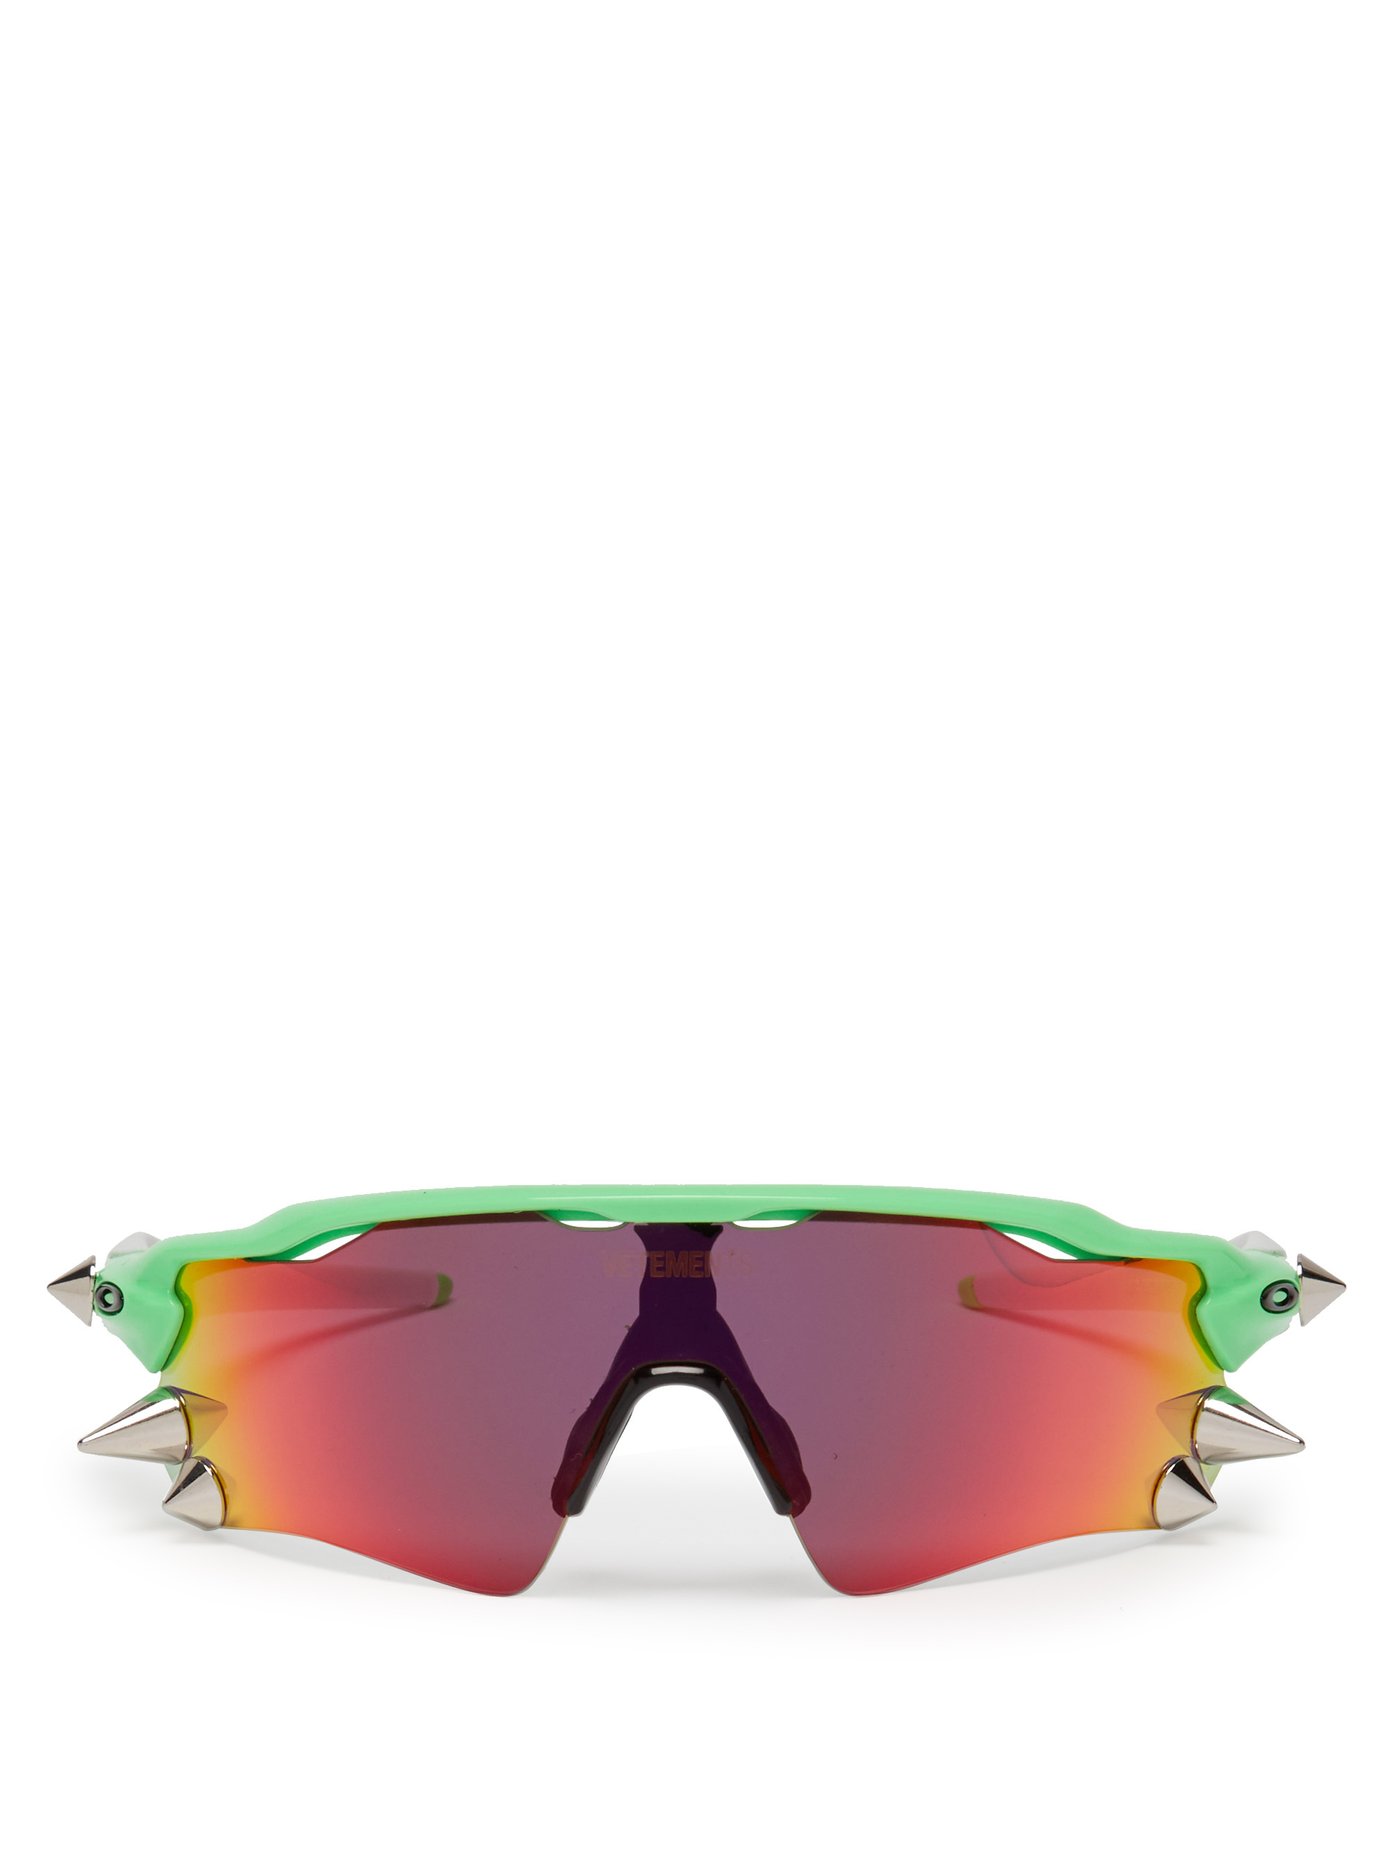 oakley where to buy